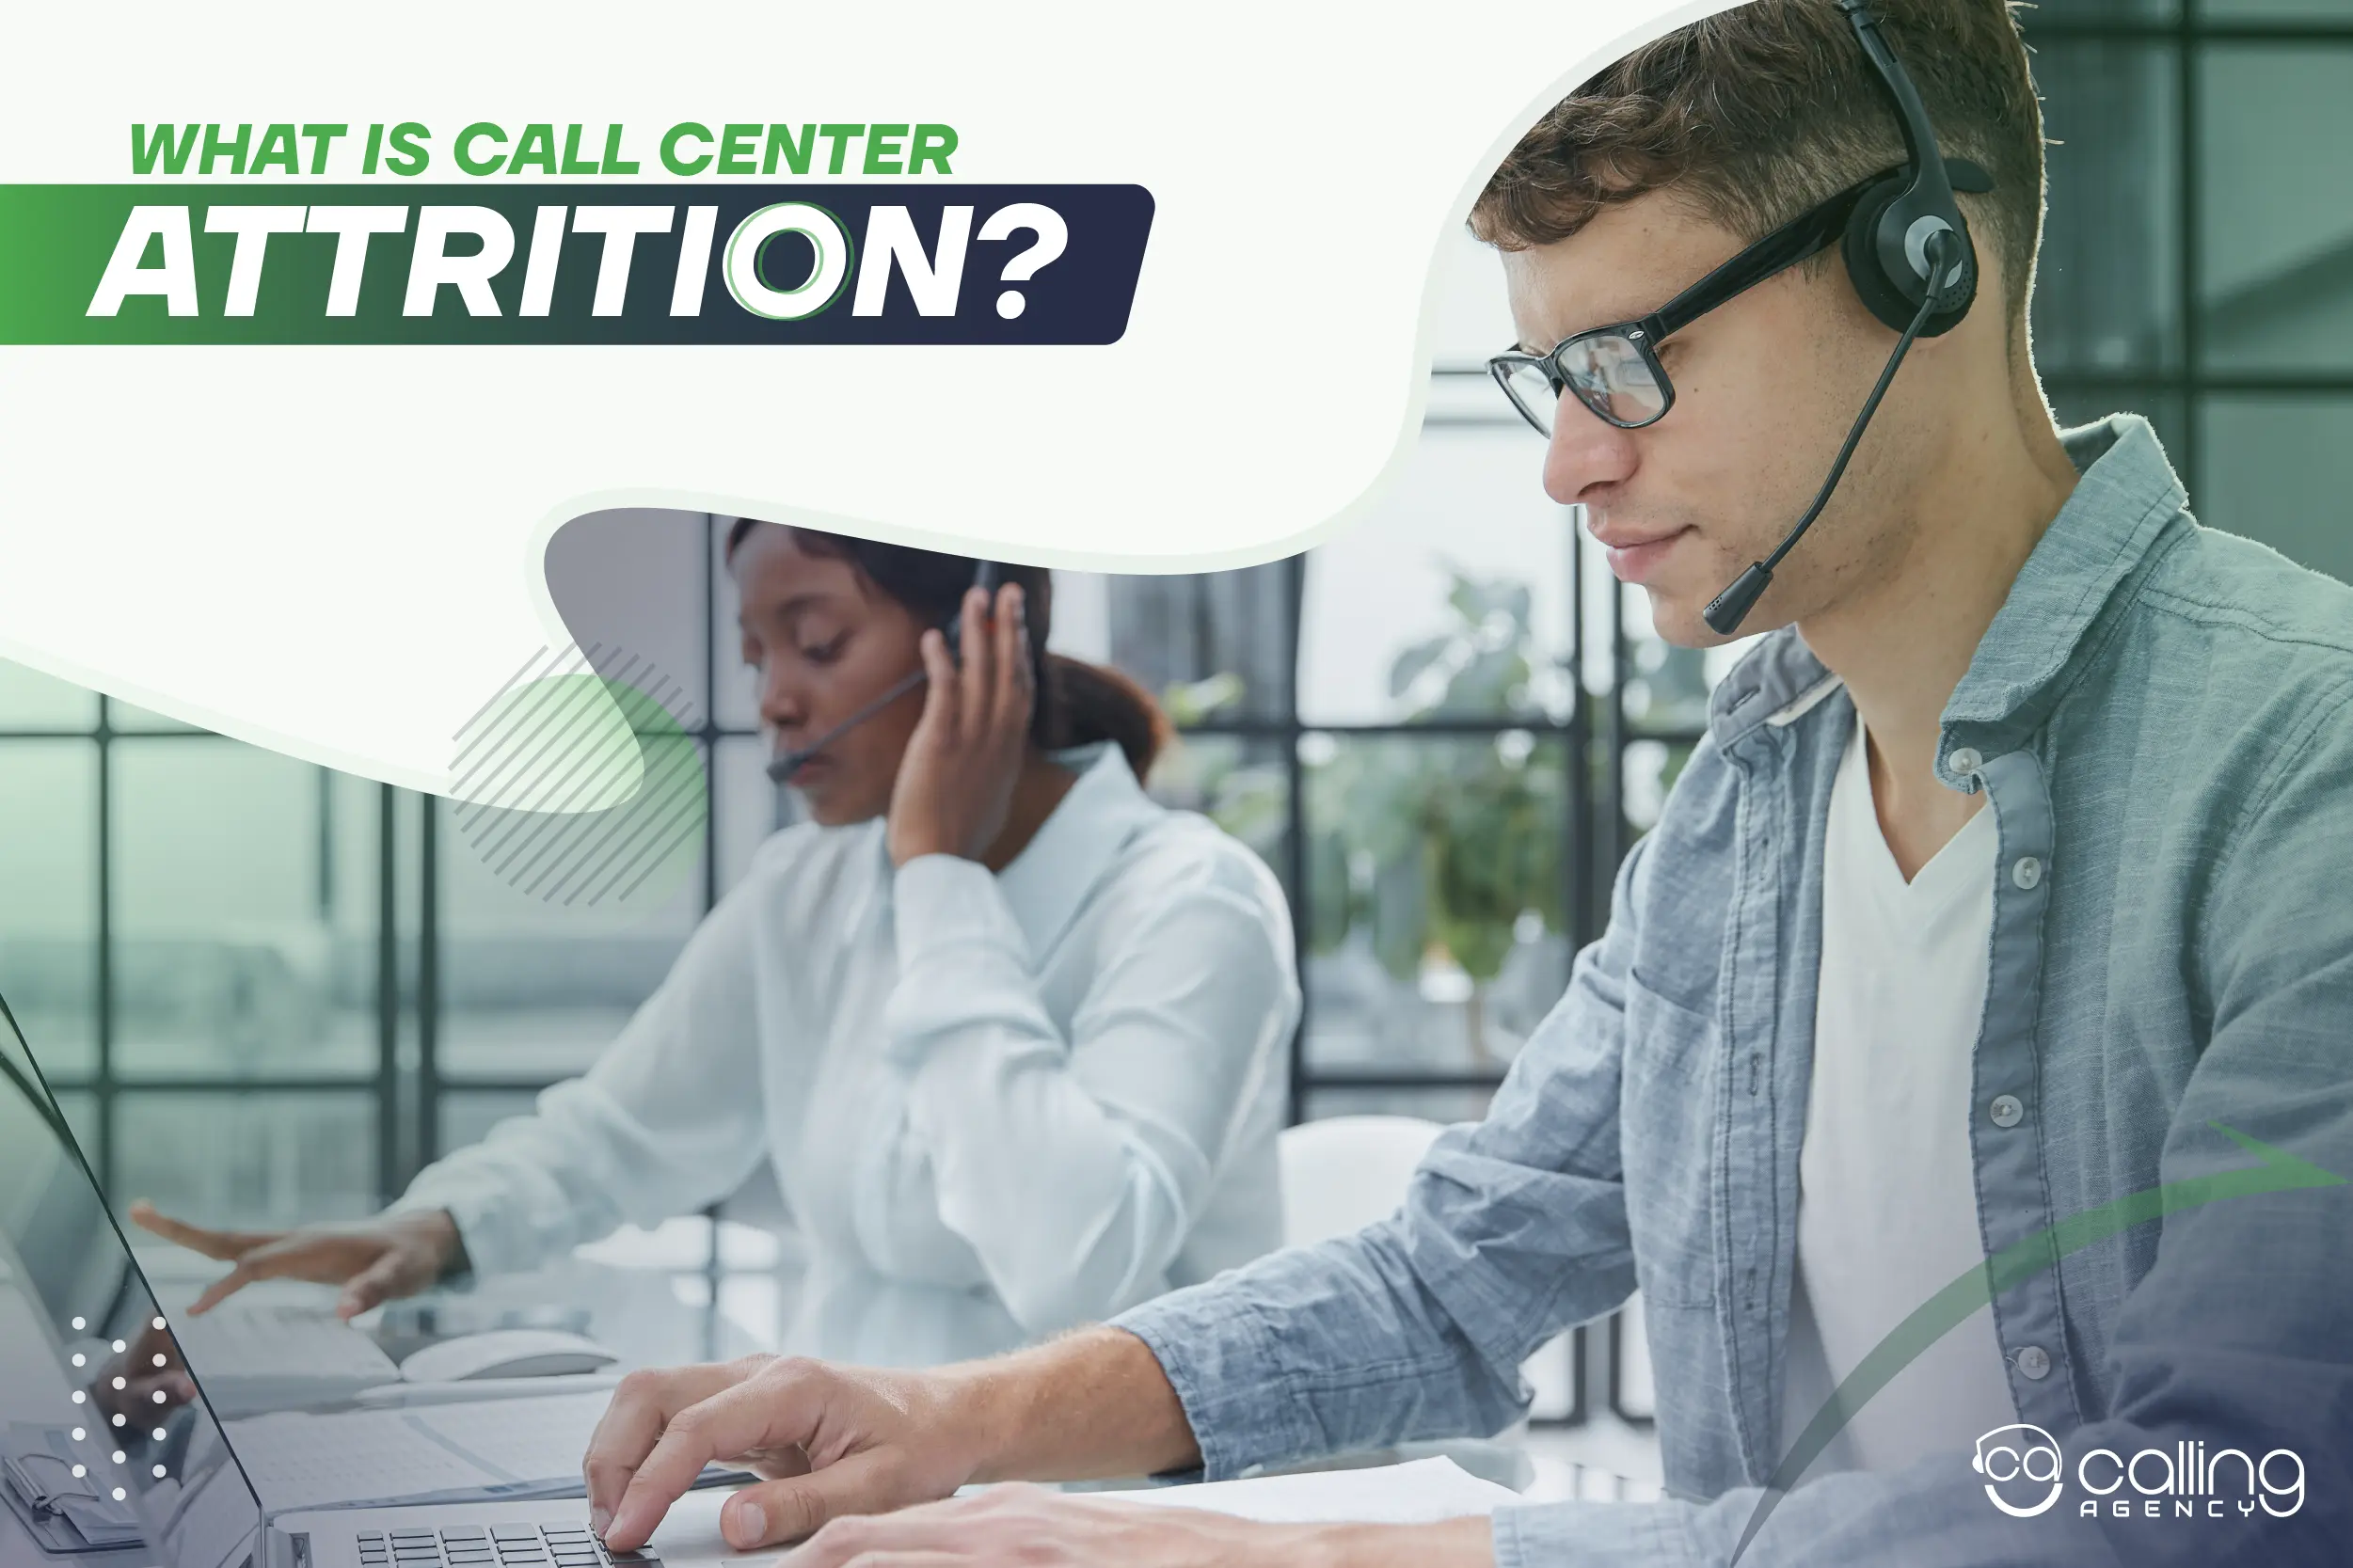 What Is Call Center Attrition?